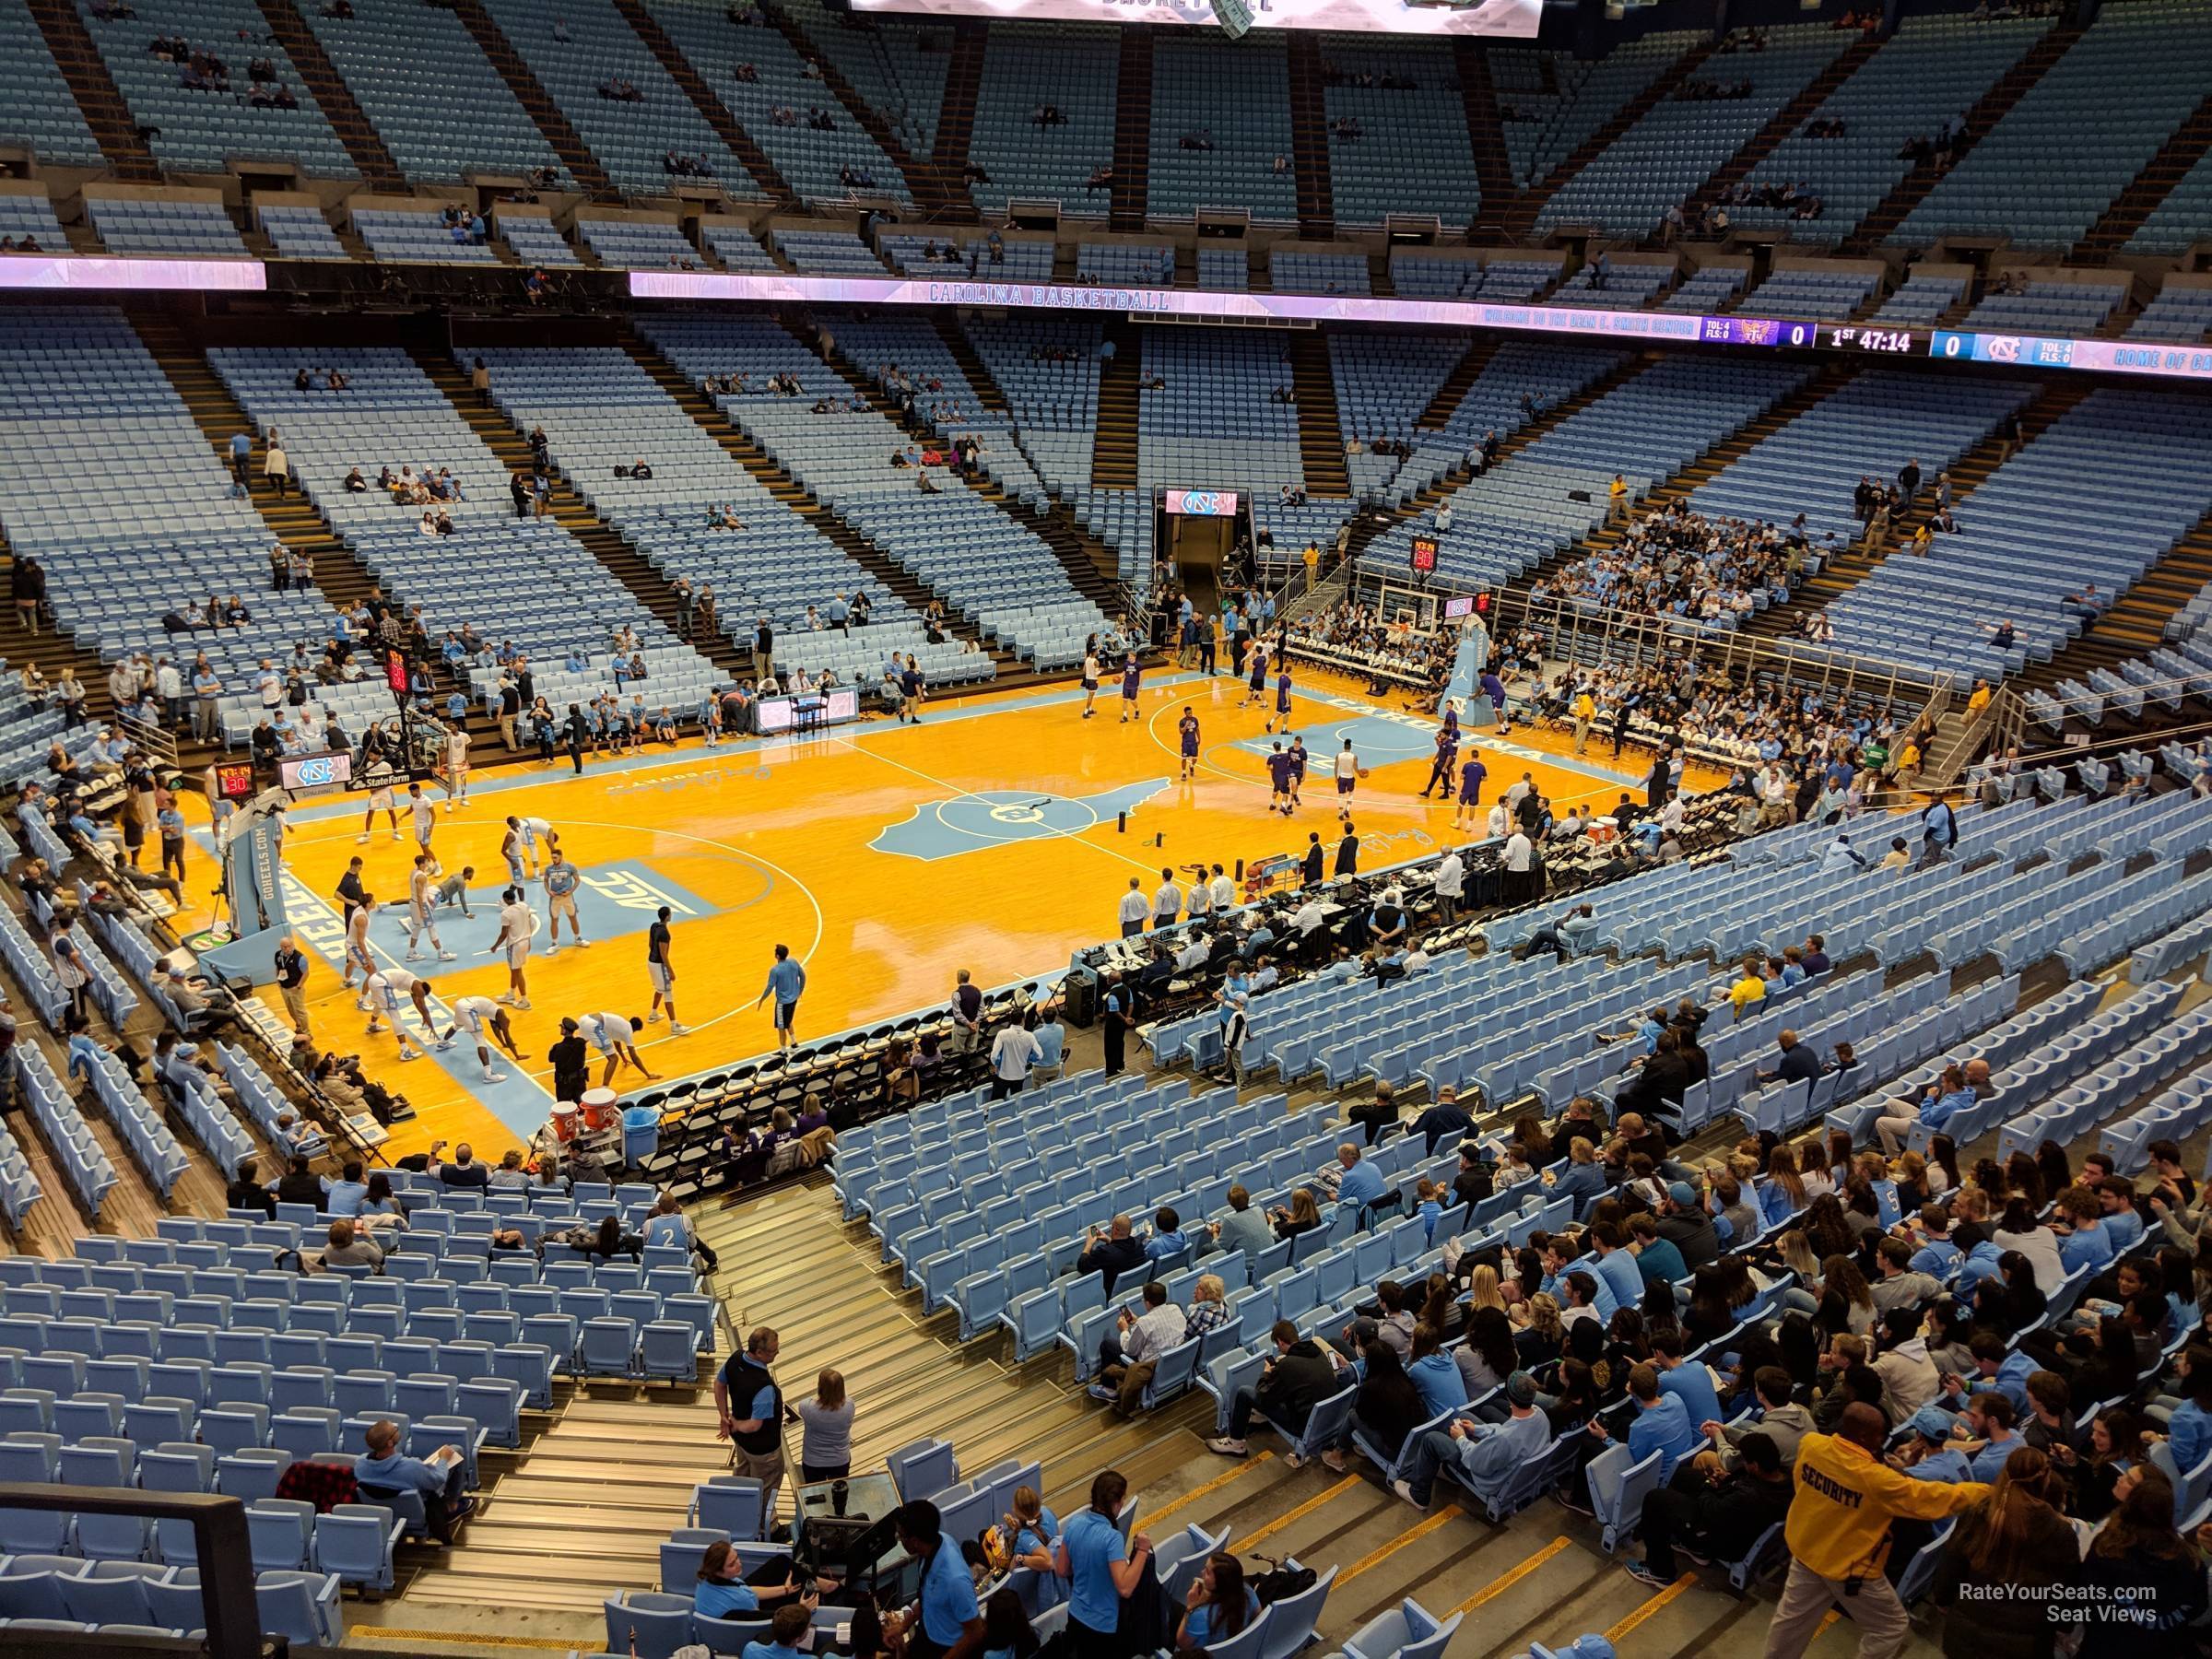 section 205, row c seat view  - dean smith center